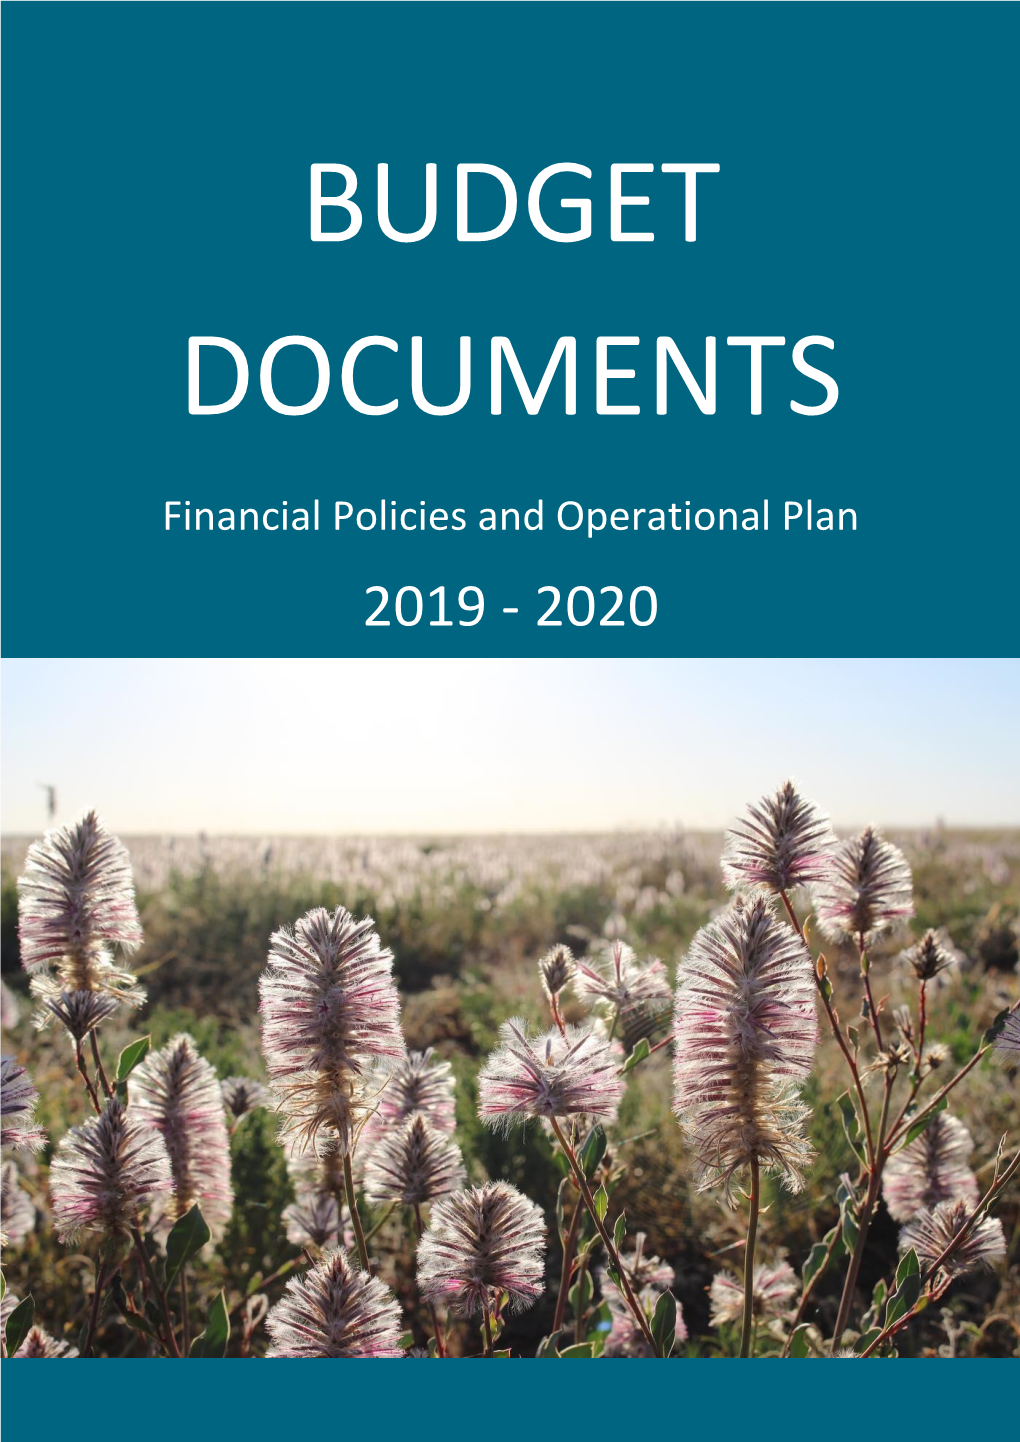 Financial Policies and Operational Plan 2019 - 2020 Contents